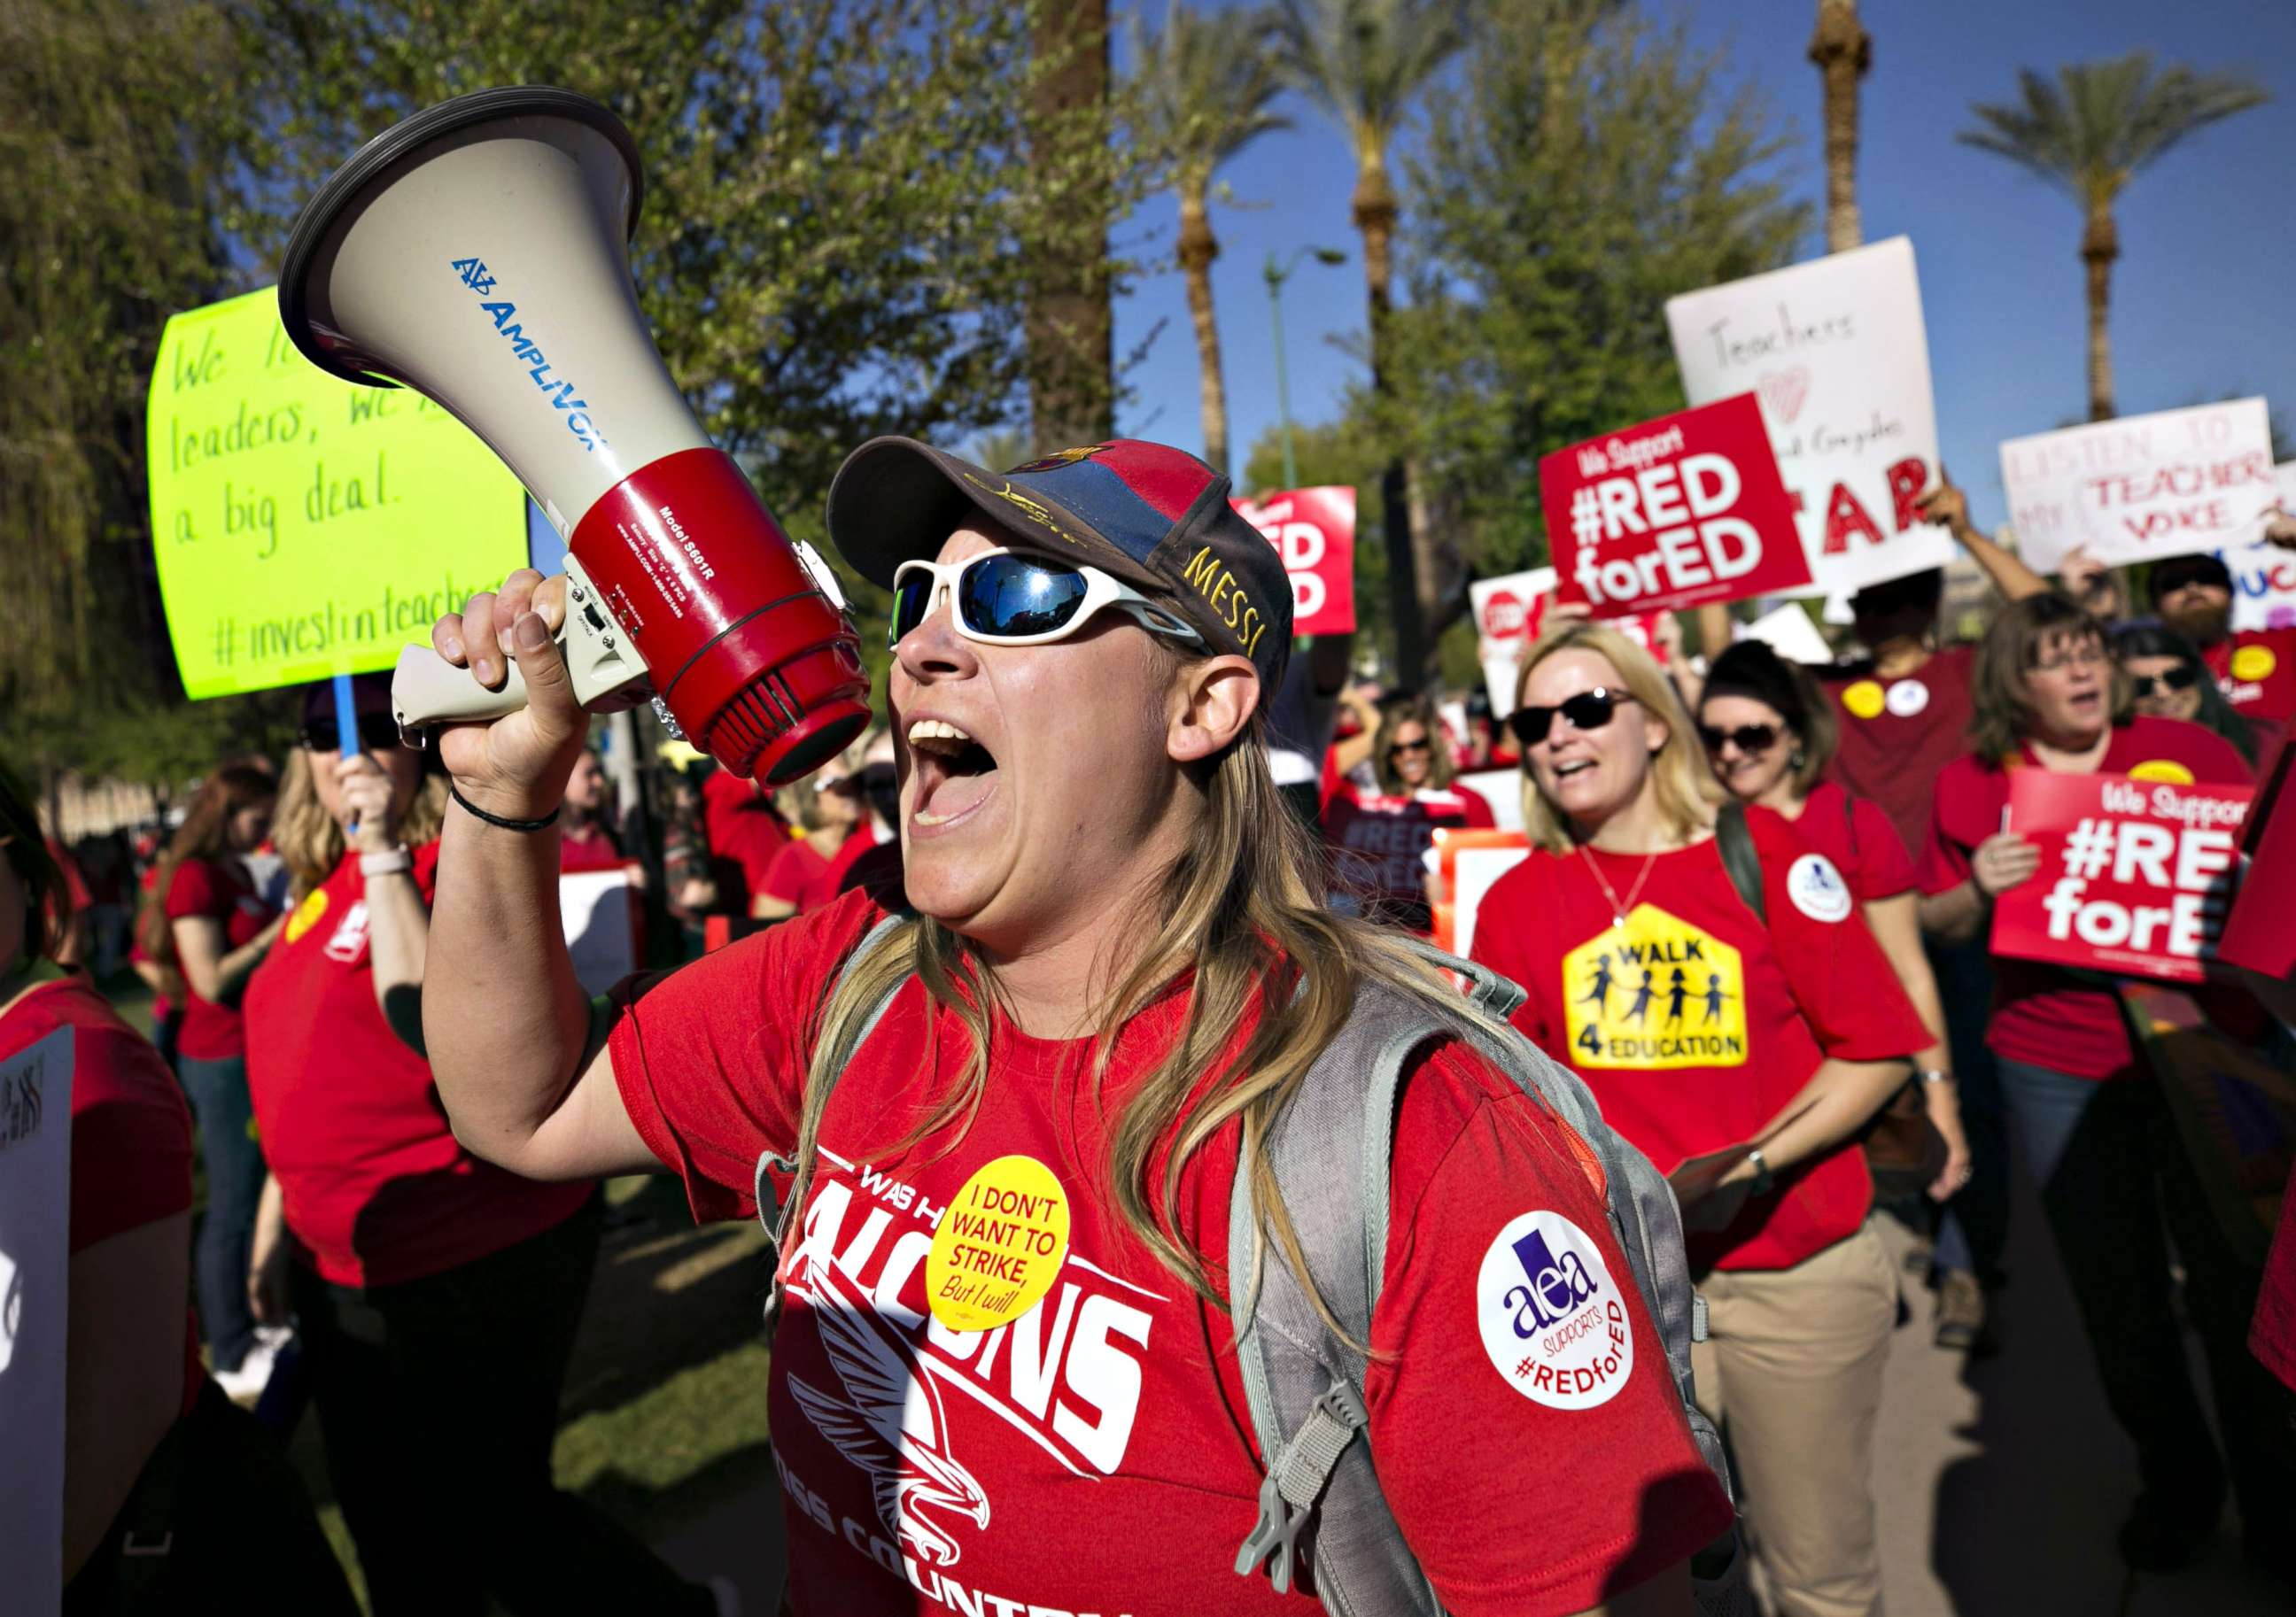 PHOTO: Lindsay Breon, a Physical Education teacher at Washington Elementary School in Phoenix, shouts into a megaphone while  rallying to support teachers during a #RedForEd rally at the Arizona State Capitol, in Phoenix, March 28, 2018.